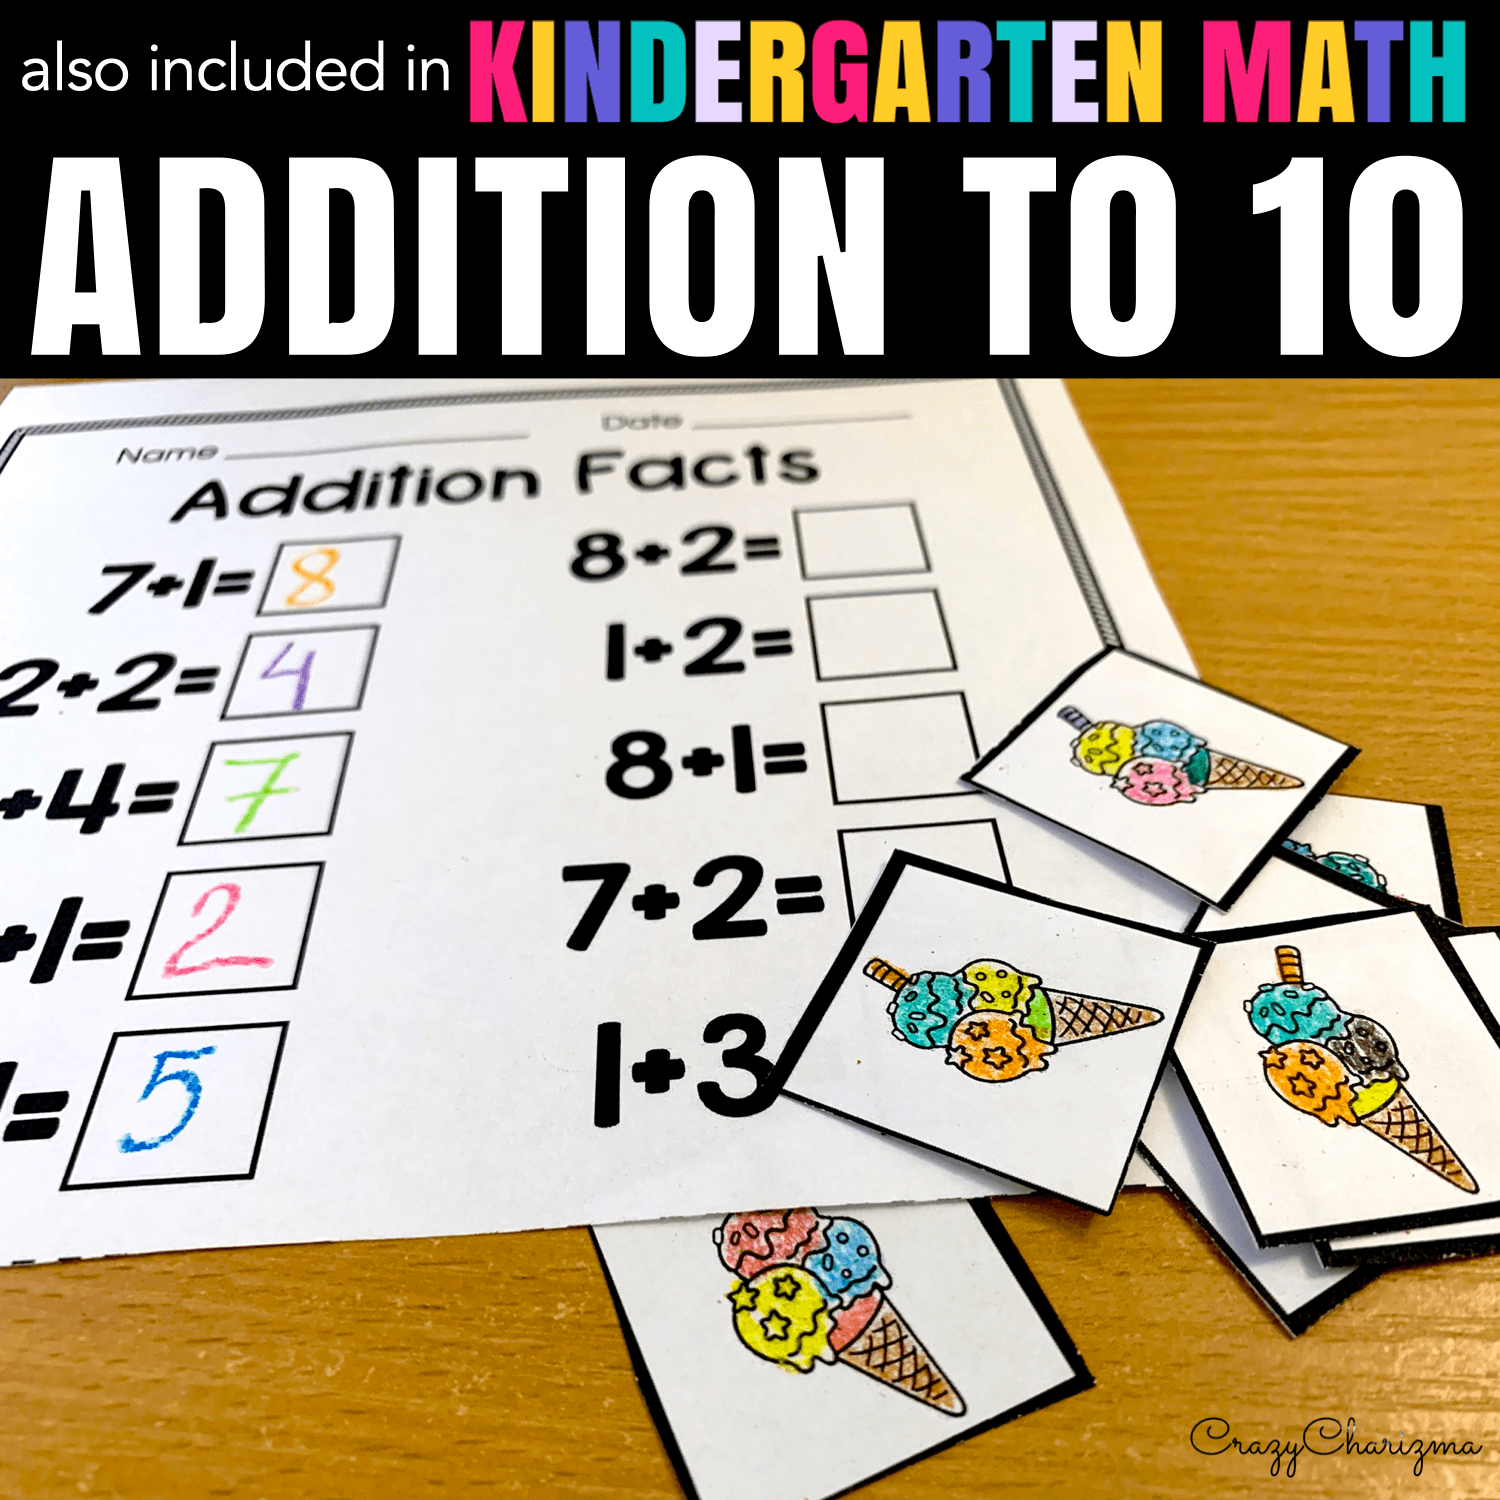 Practice addition to 10 facts with counters. Find inside 80 pages of practice!